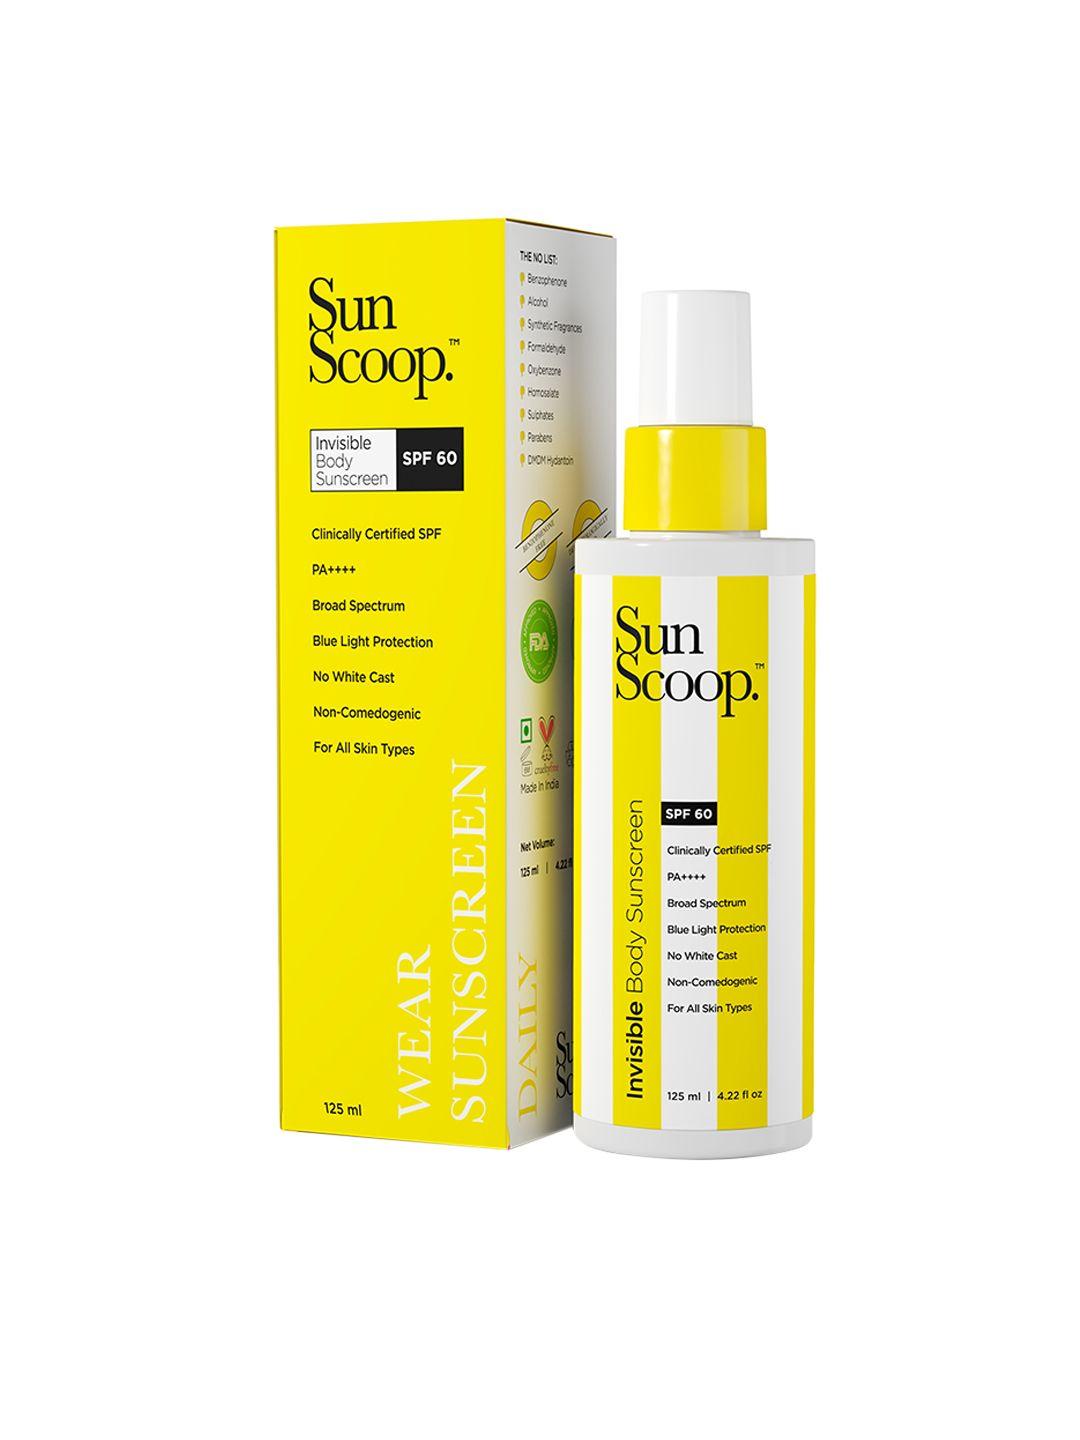 sunscoop spf 60 invisible body sunscreen for blue light protection - 125 ml